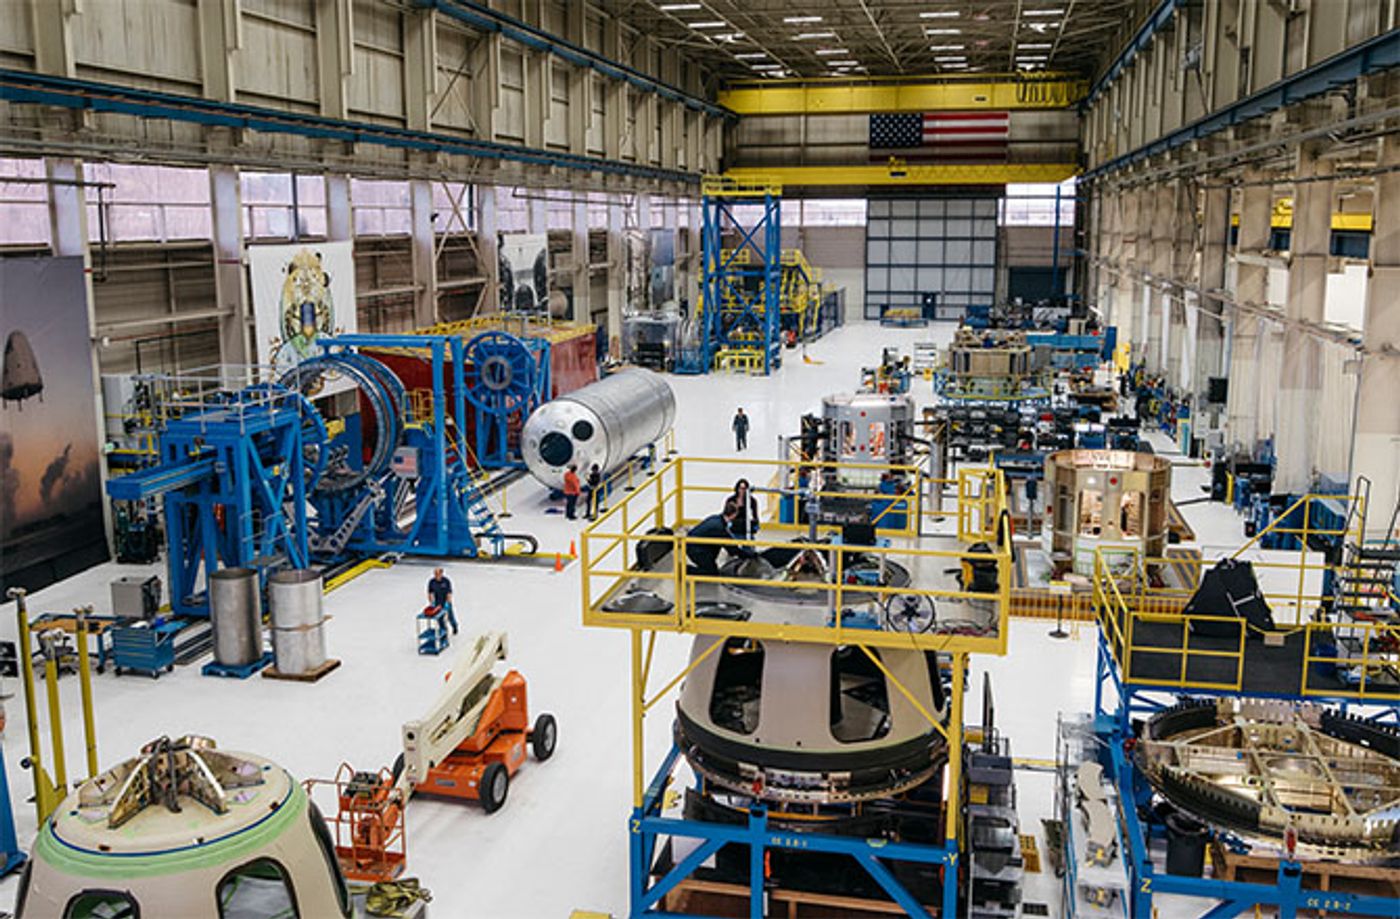 A rare first-time look inside of the Blue Origin headquarters, hosted by Jeff Bezos himself.